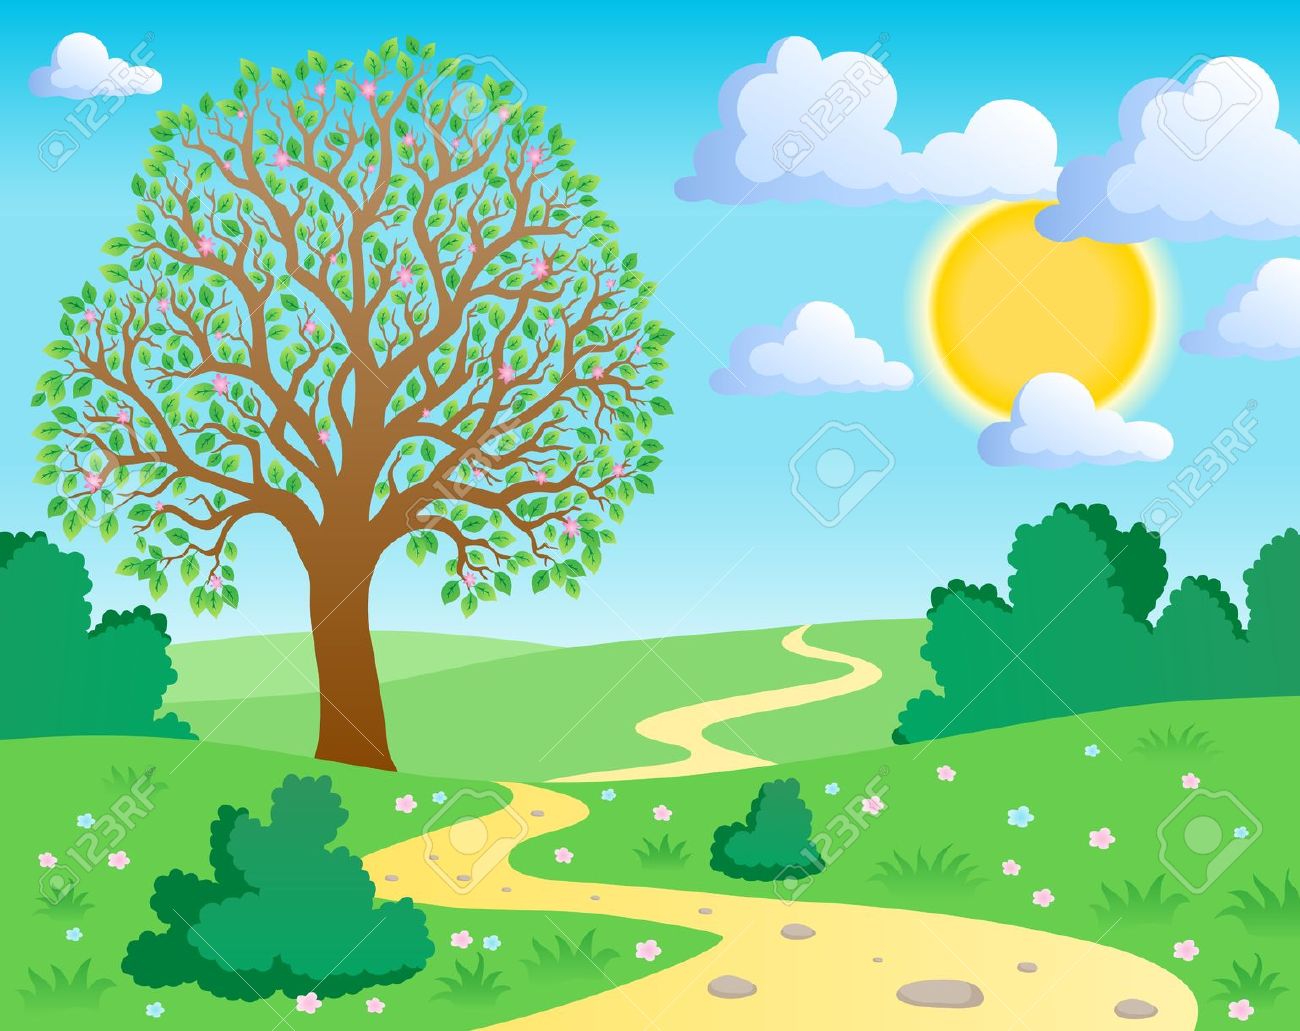 Nature scenery clipart.